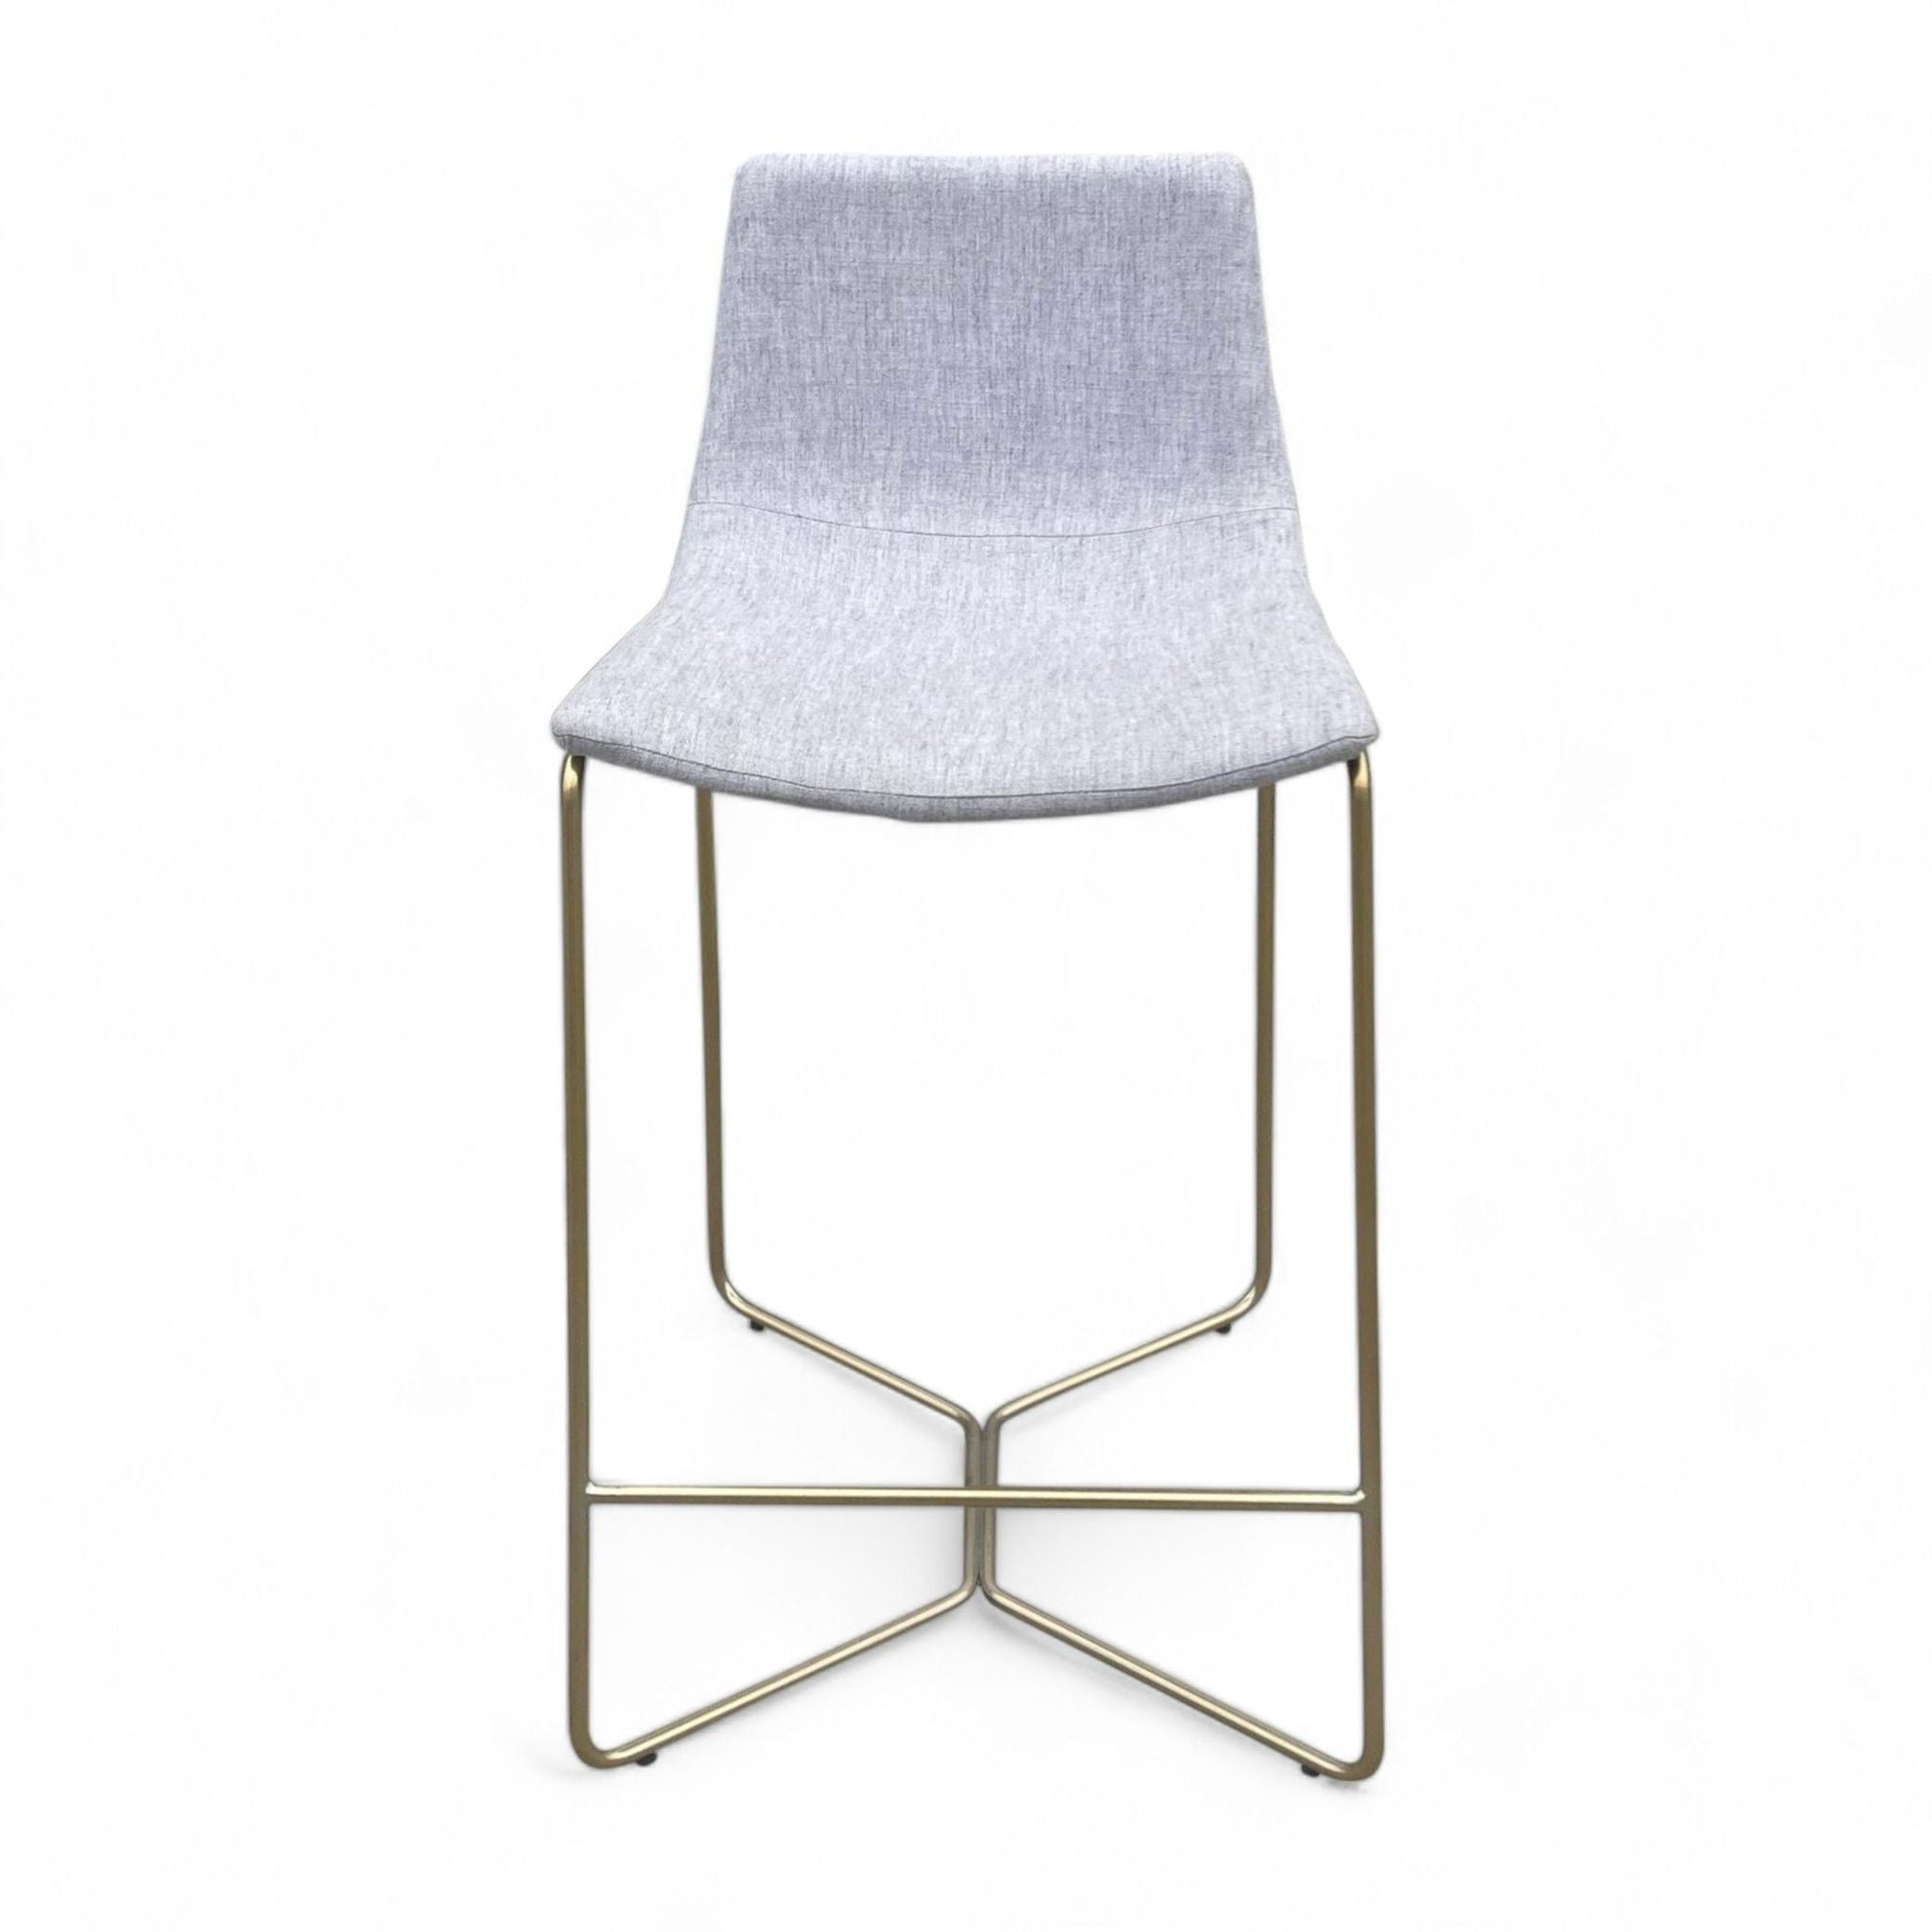 Gray upholstered West Elm counter stool with a slope seat and glam gold base.